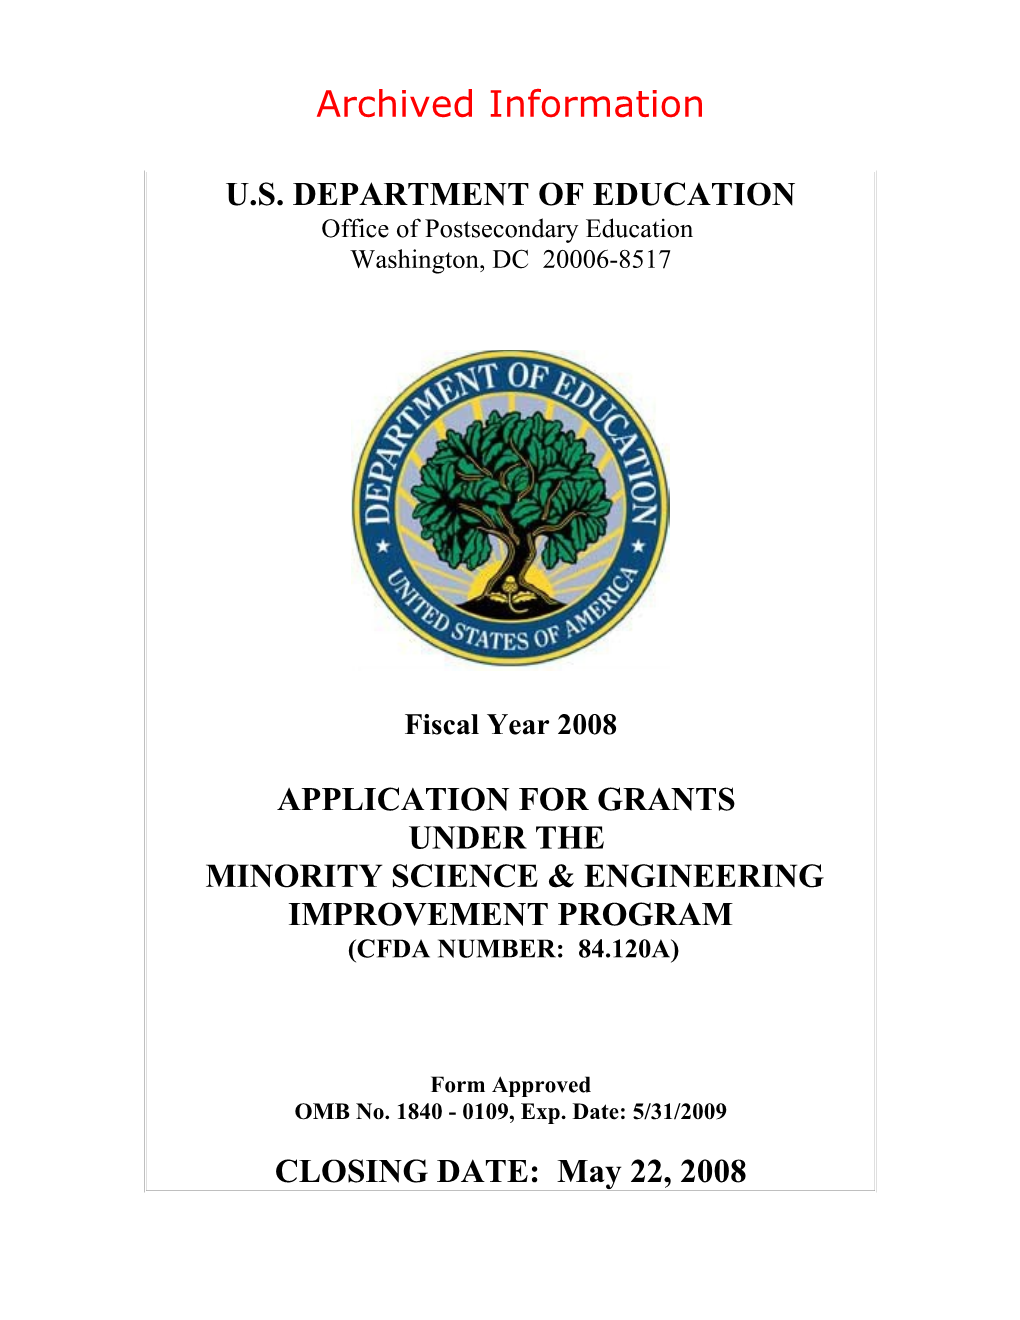 Archived FY 2008 Grant Application for the Minority Science and Engineering Improvement